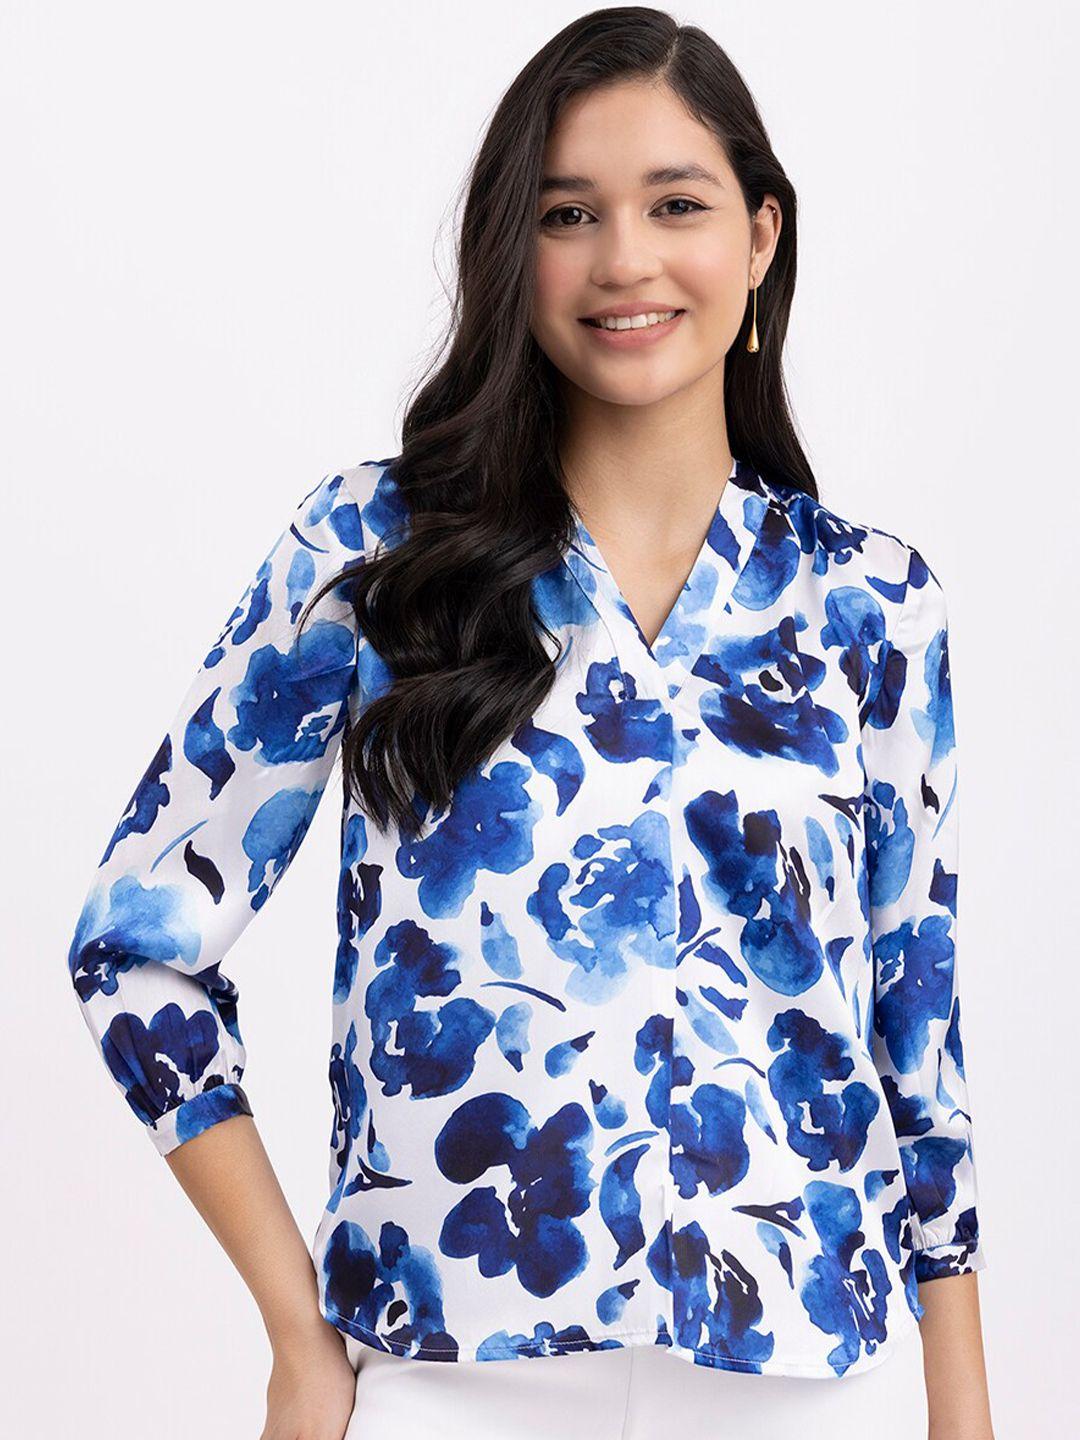 fablestreet-floral-printed-v-neck-satin-shirt-style-top